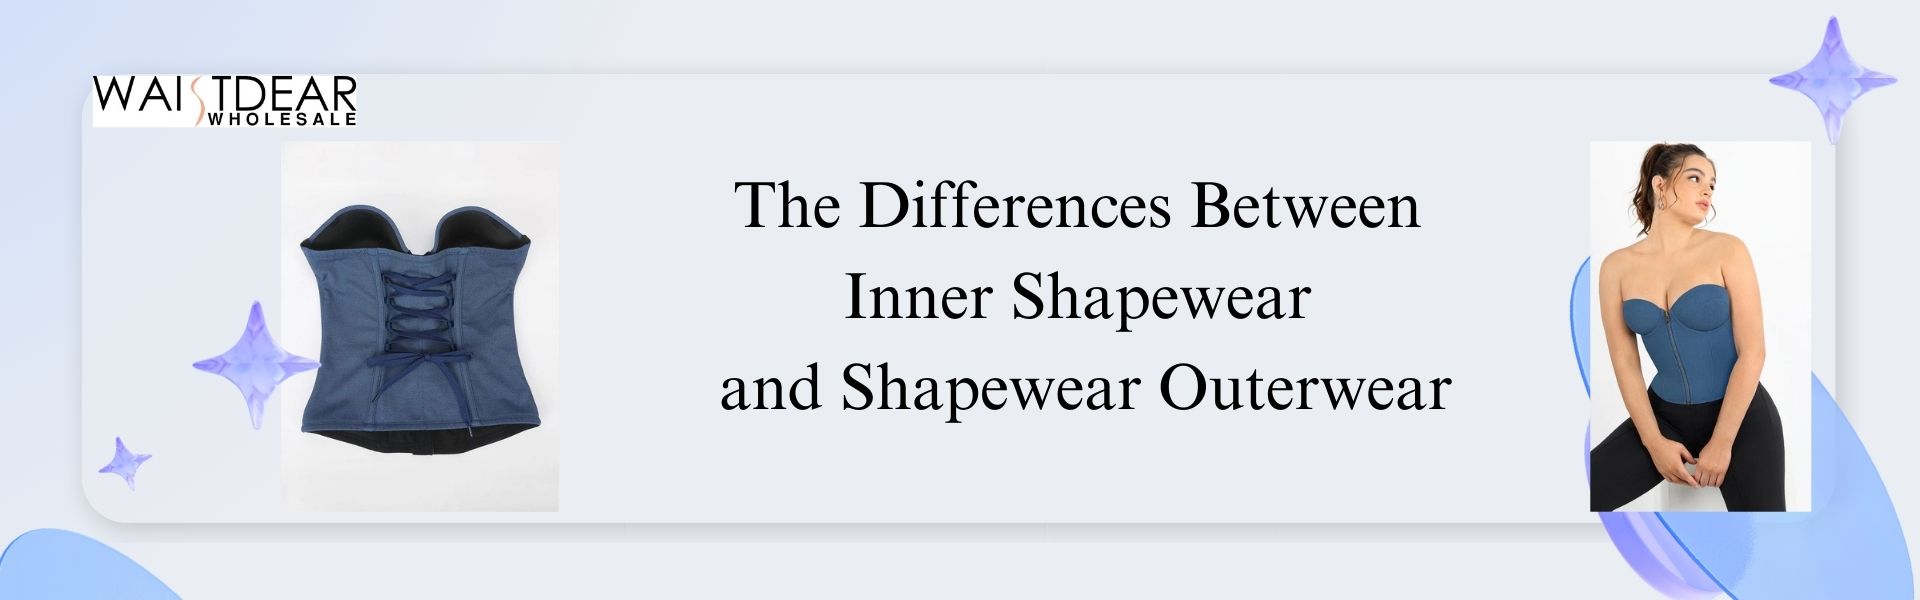 The Differences Between Inner Shapewear and Shapewear Outerwear